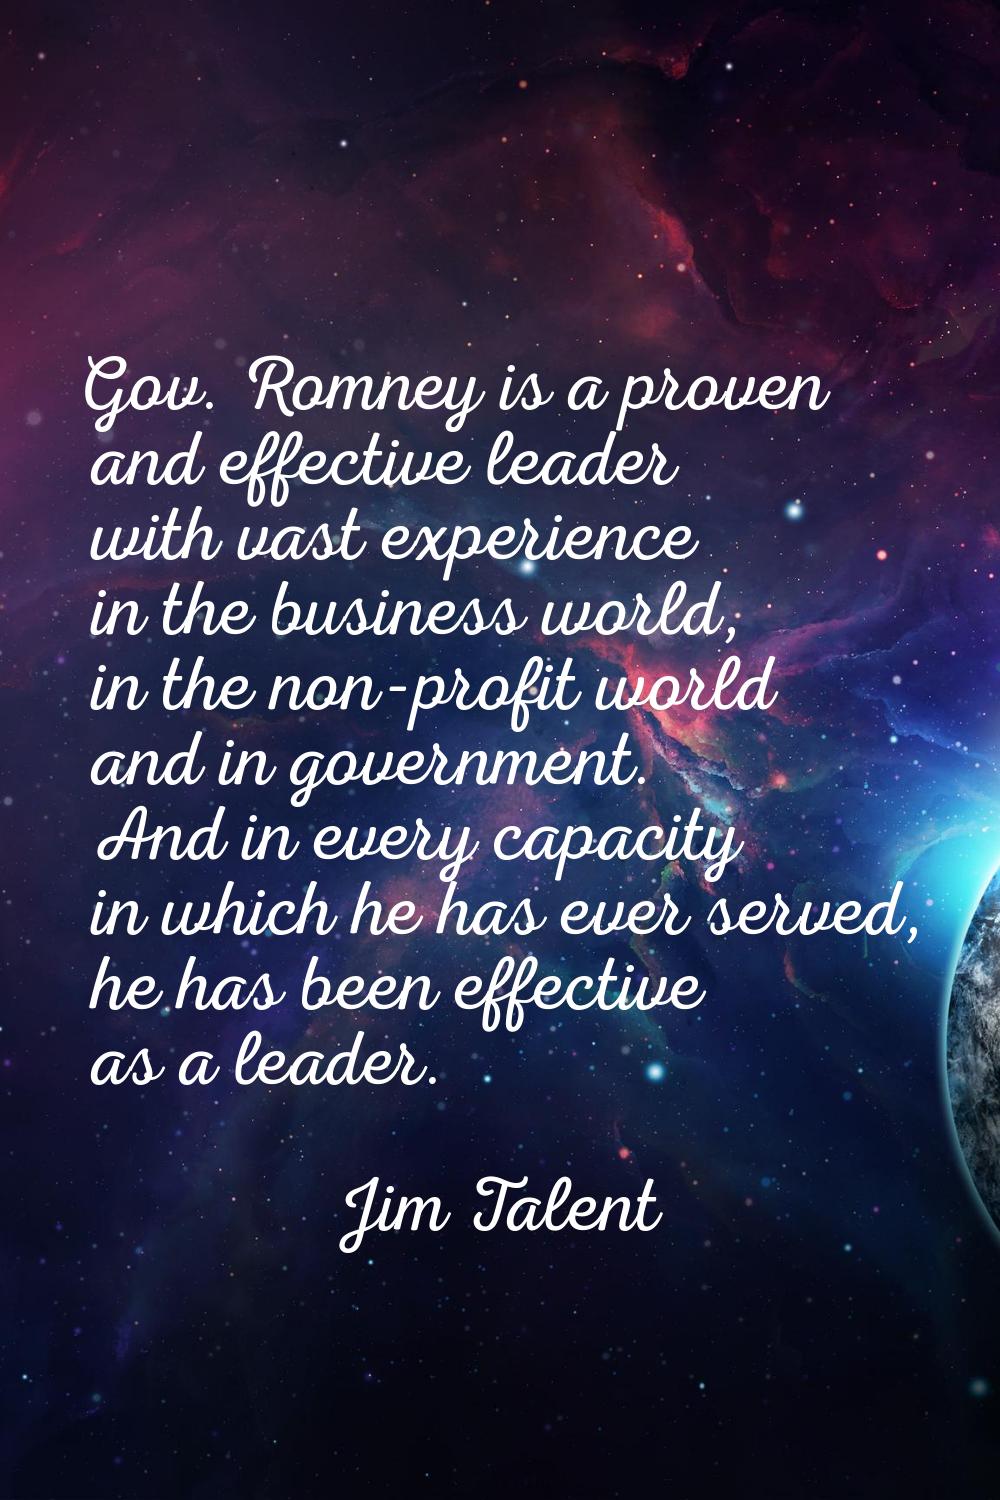 Gov. Romney is a proven and effective leader with vast experience in the business world, in the non